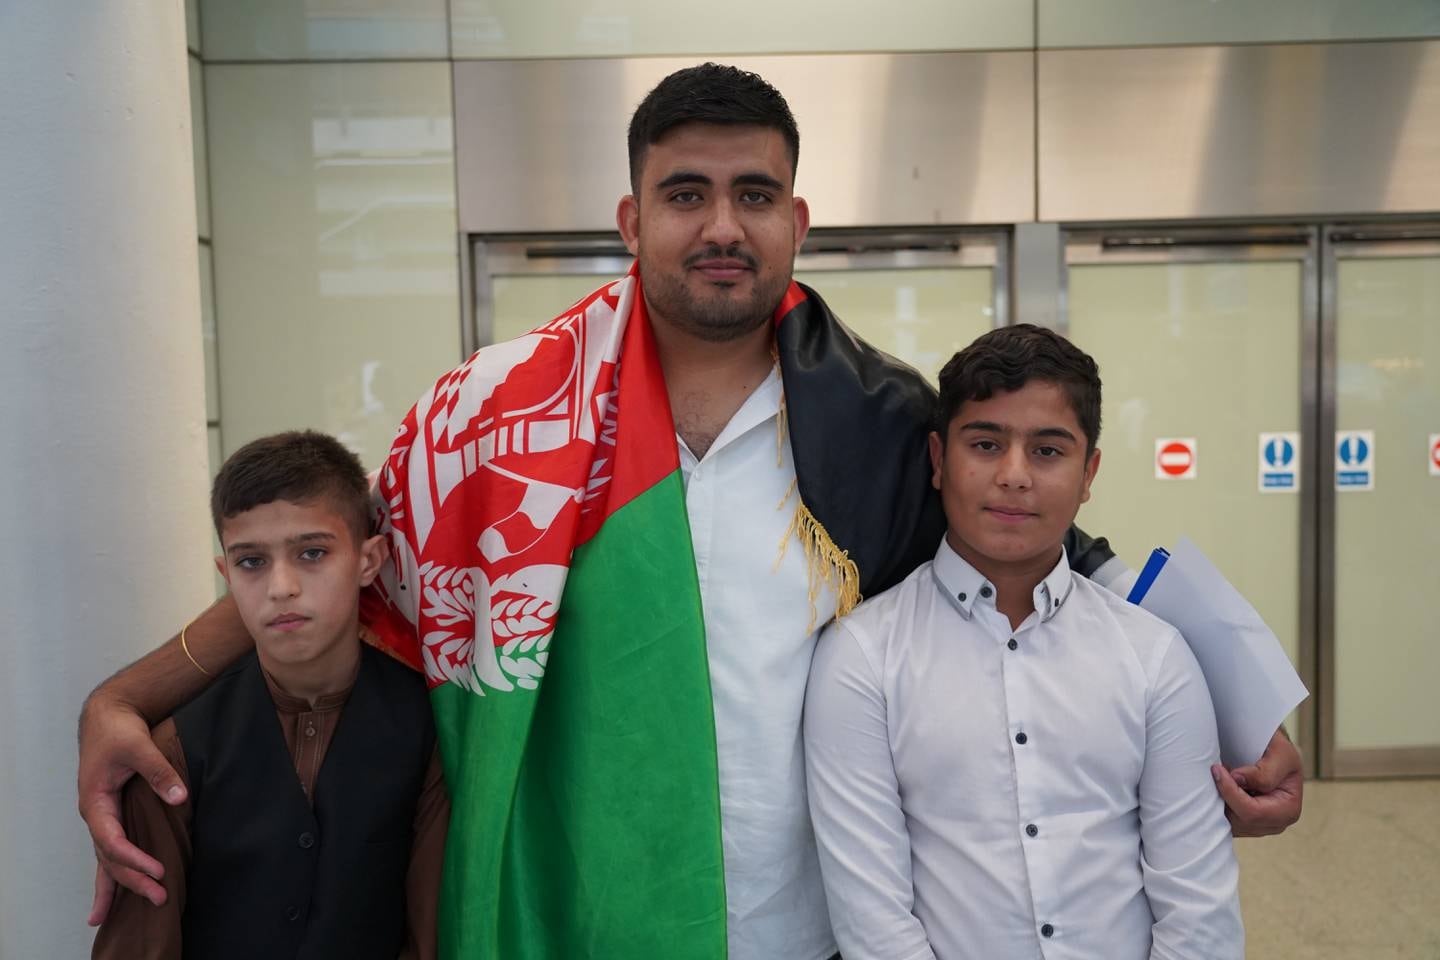 Qamar Jabarkhyl and his cousins, Irfanullah and Obaidullah Jabarkhyl, at St Pancras in London. The boys were separated a year ago during the evacuation of Kabul. Amy McConaughy / The National